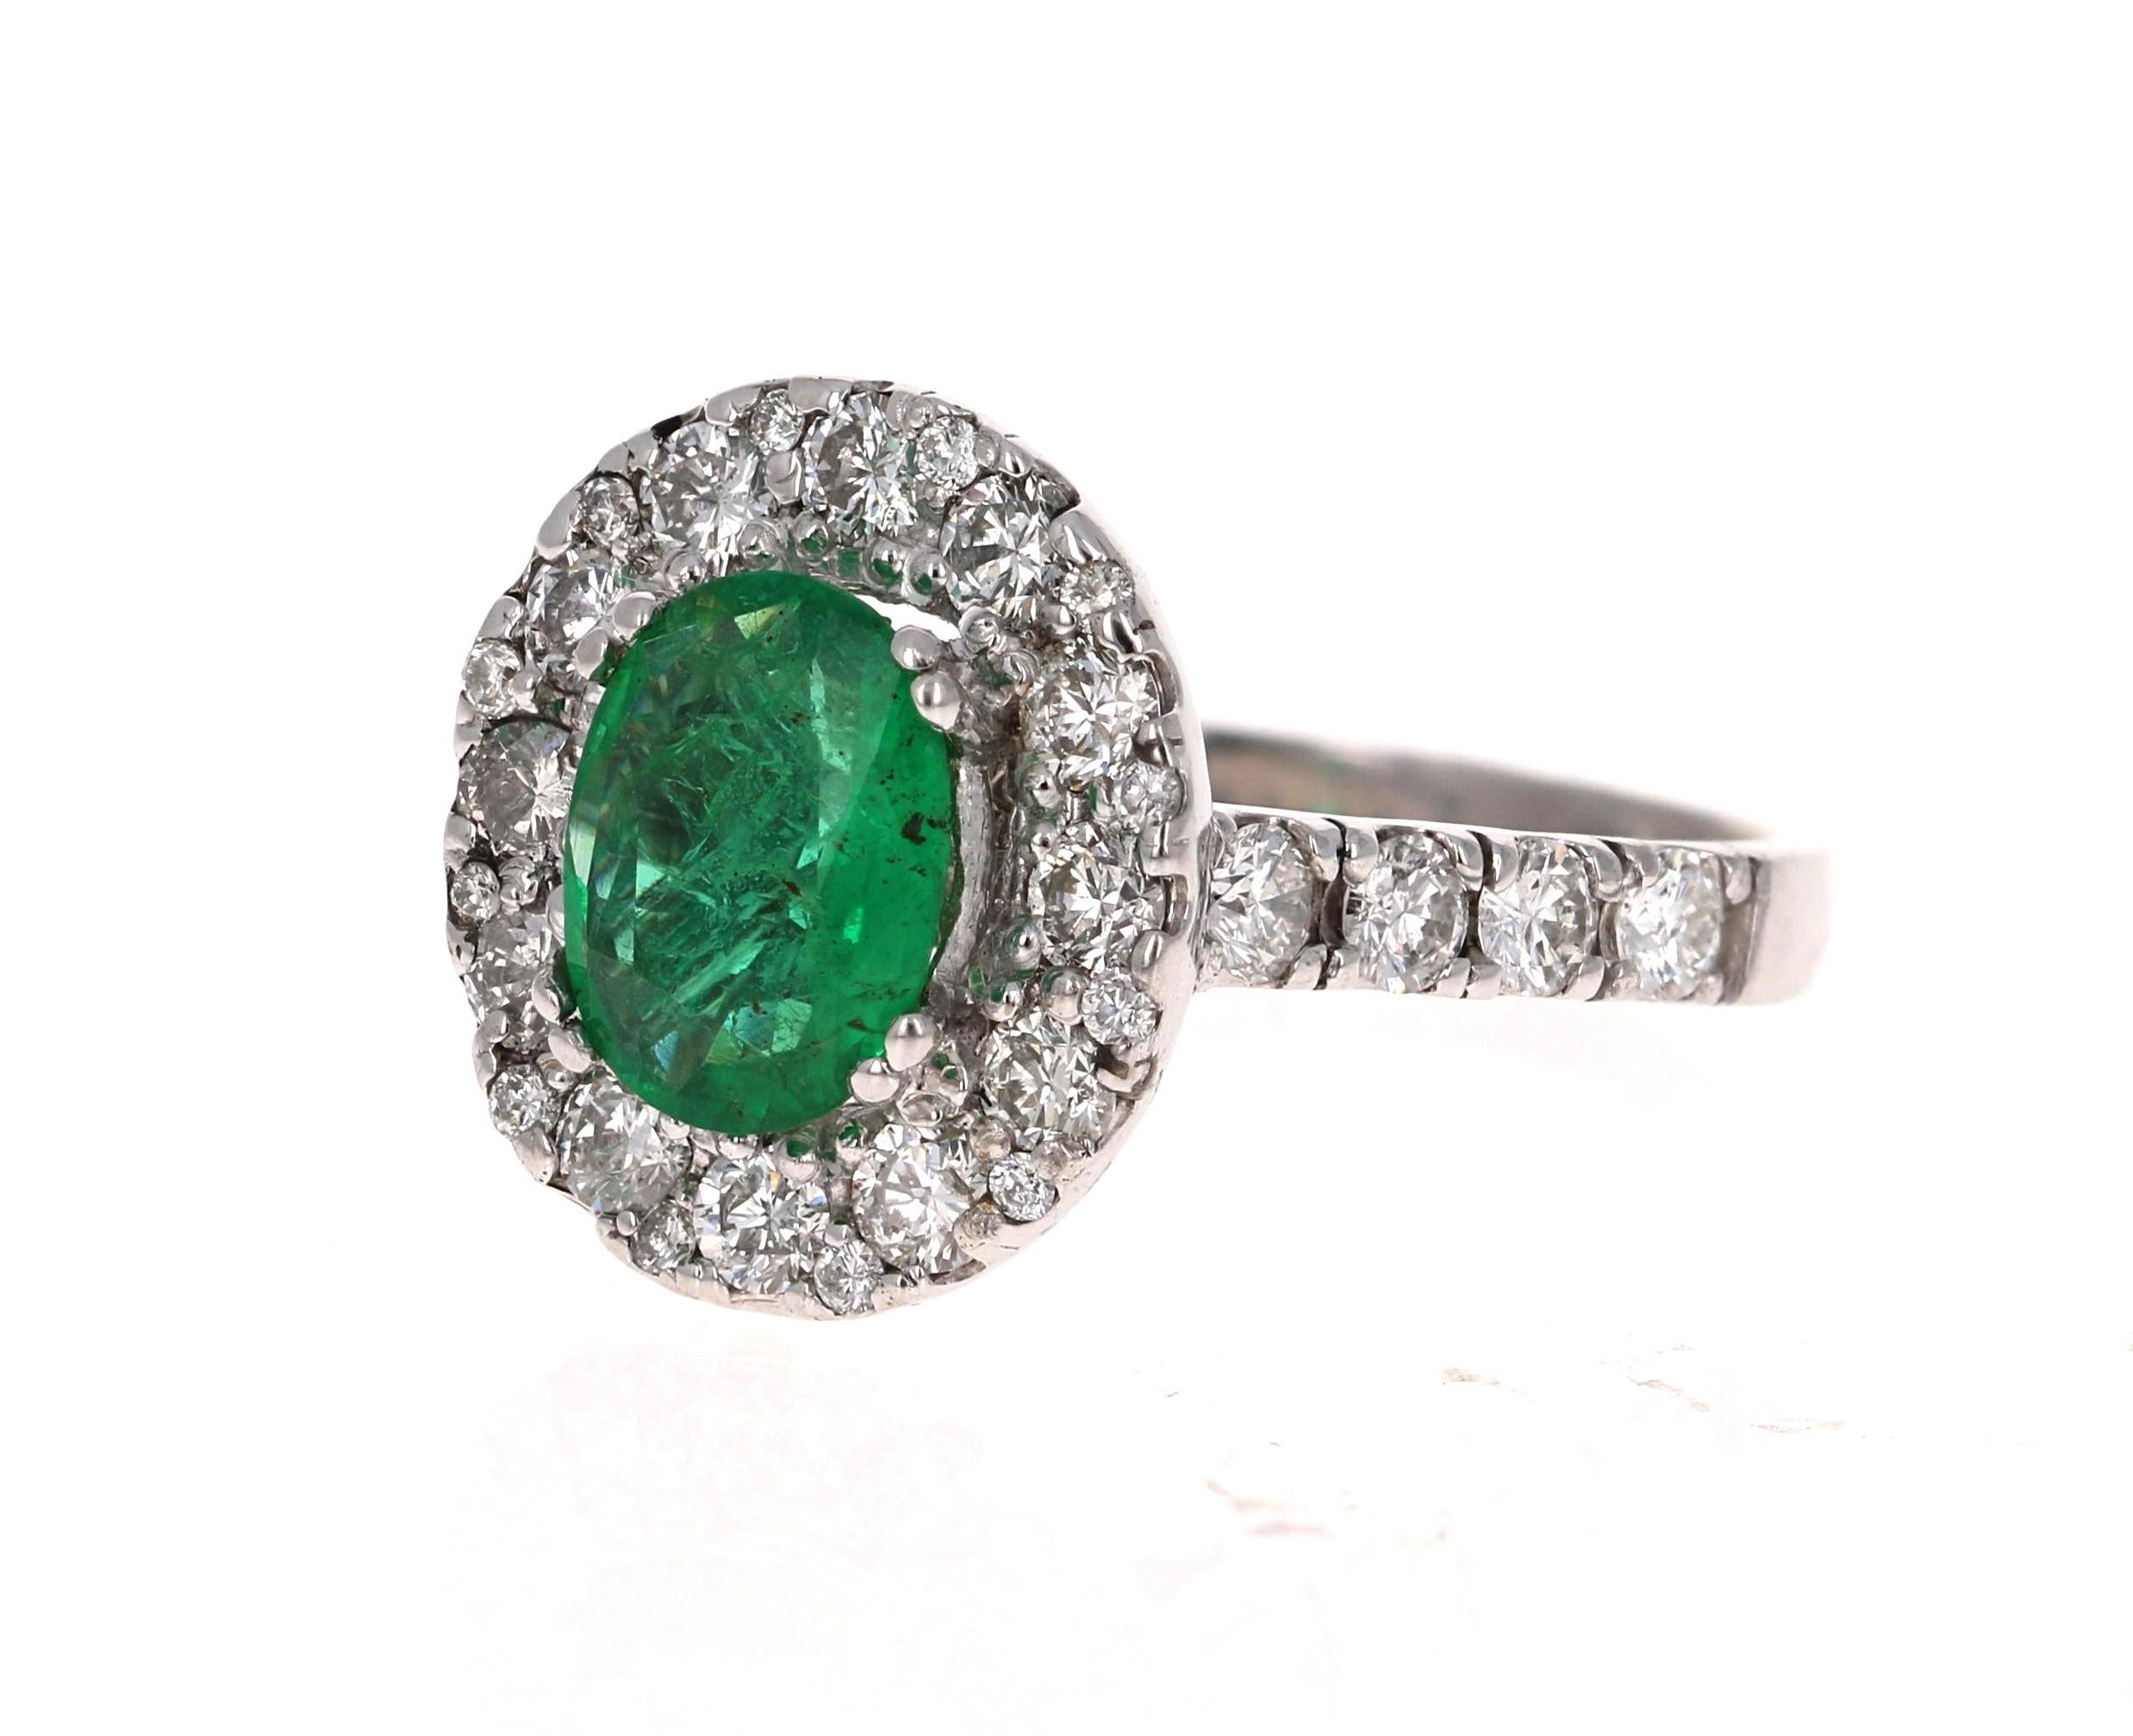 This is a gorgeous, gorgeous, gorgeous Emerald and Diamond Ring!  This 14K White Gold Ring has an Oval Cut Emerald that weighs 1.26 carats and is surrounded by a Halo of 32 Round Cut Diamonds that weigh 1.40 Carats. (Clarity: SI1, Color: F).  The